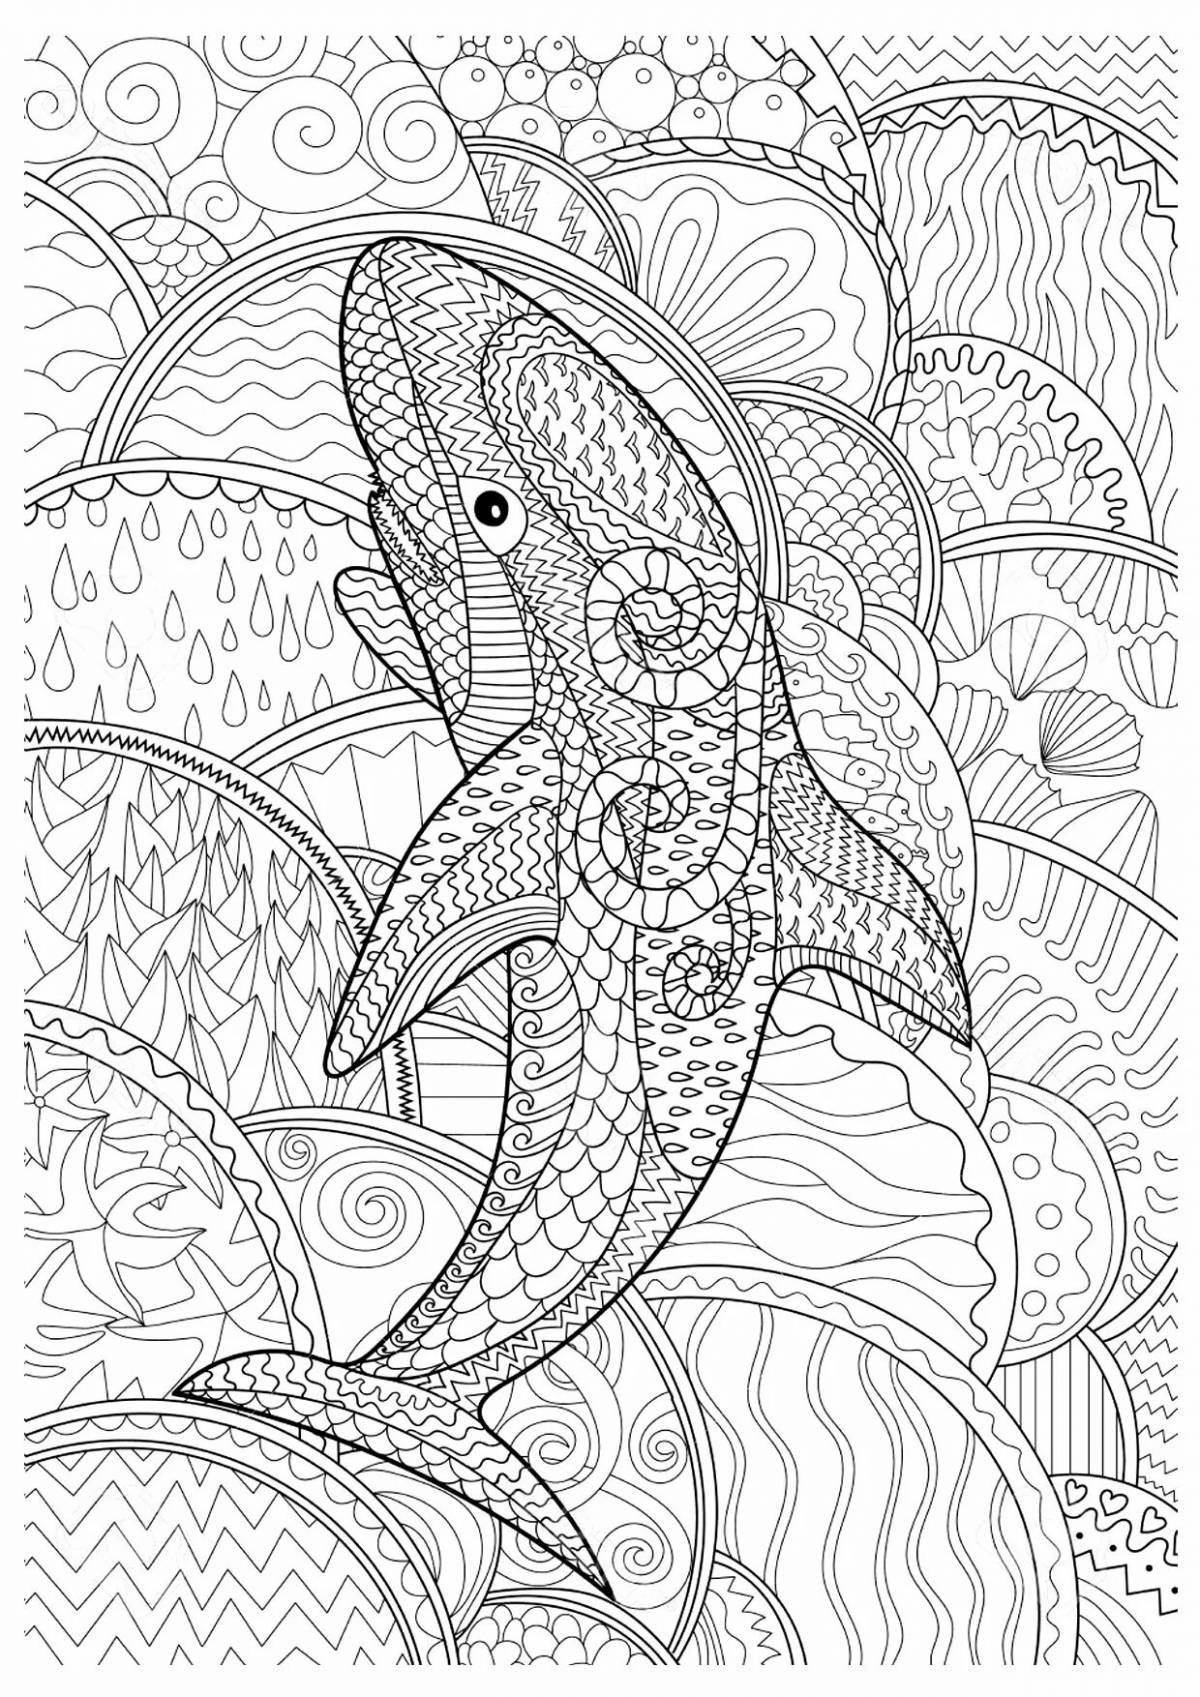 Soothing anti-stress marine life coloring book